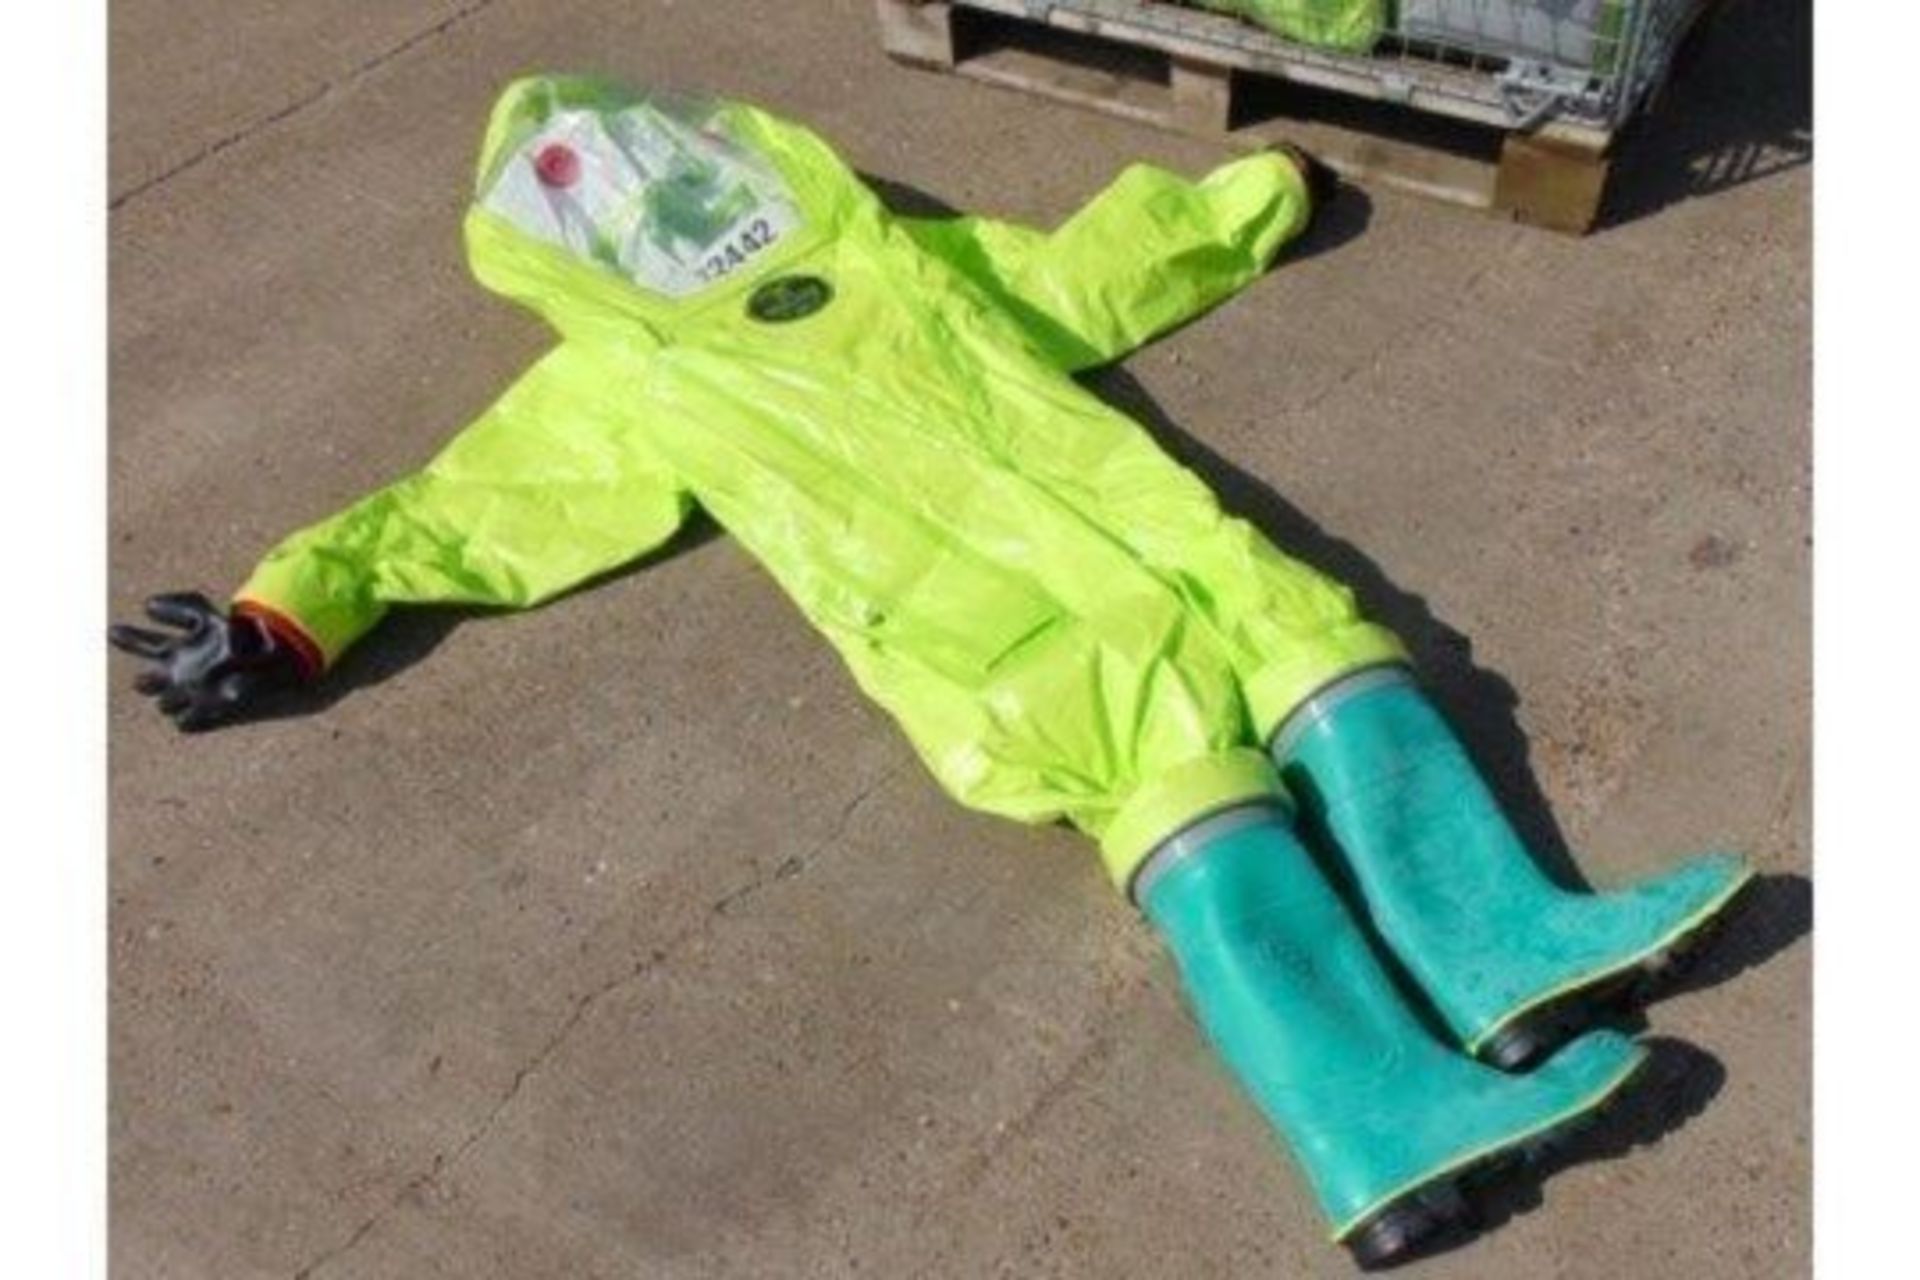 10 x Respirex Tychem TK Gas-Tight Hazmat Suit Type 1A with Attached Boots and Gloves. - Image 4 of 10